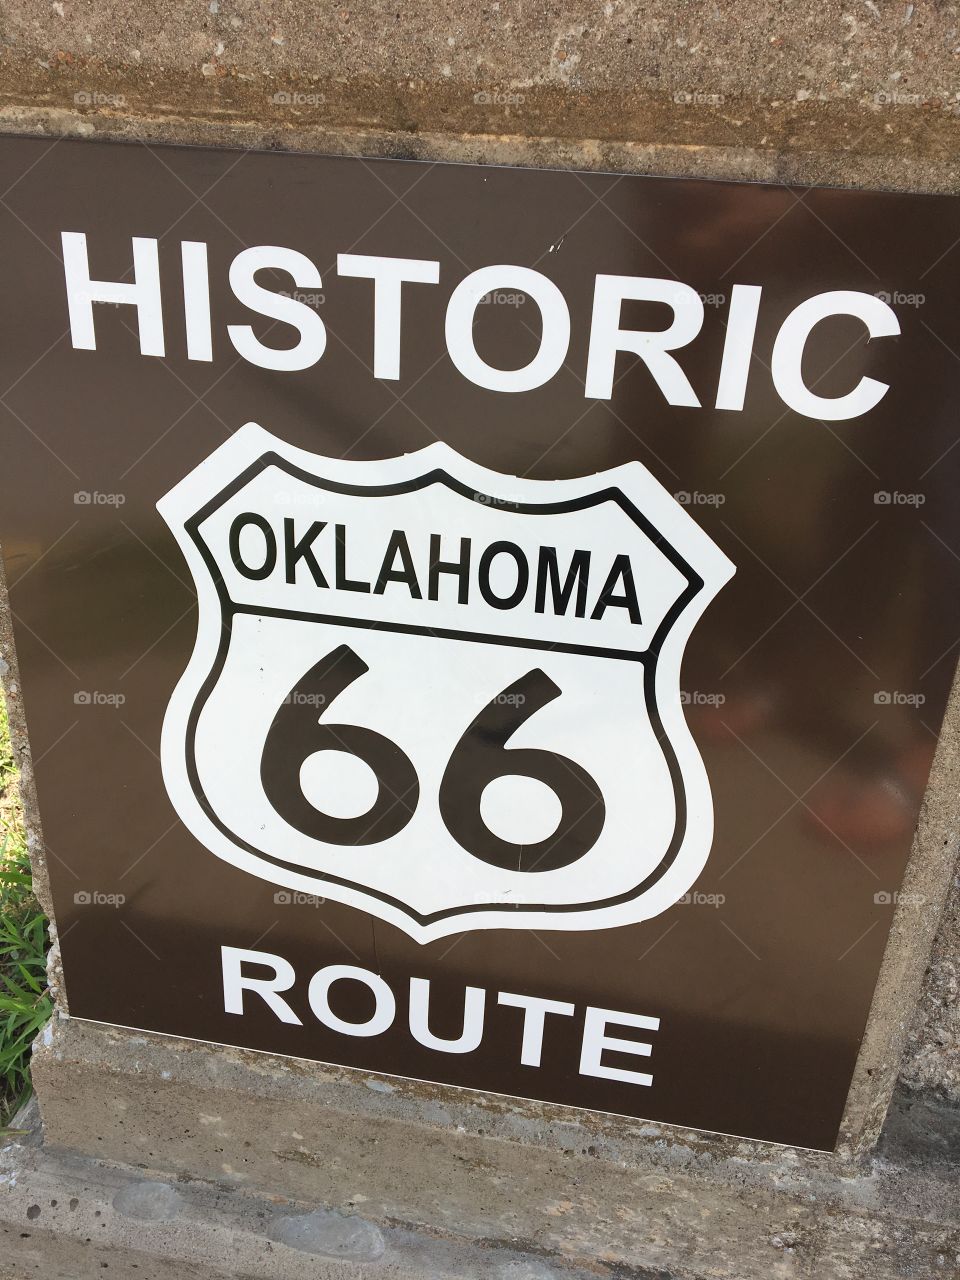 Historic Route 66 Sign in Oklahoma 